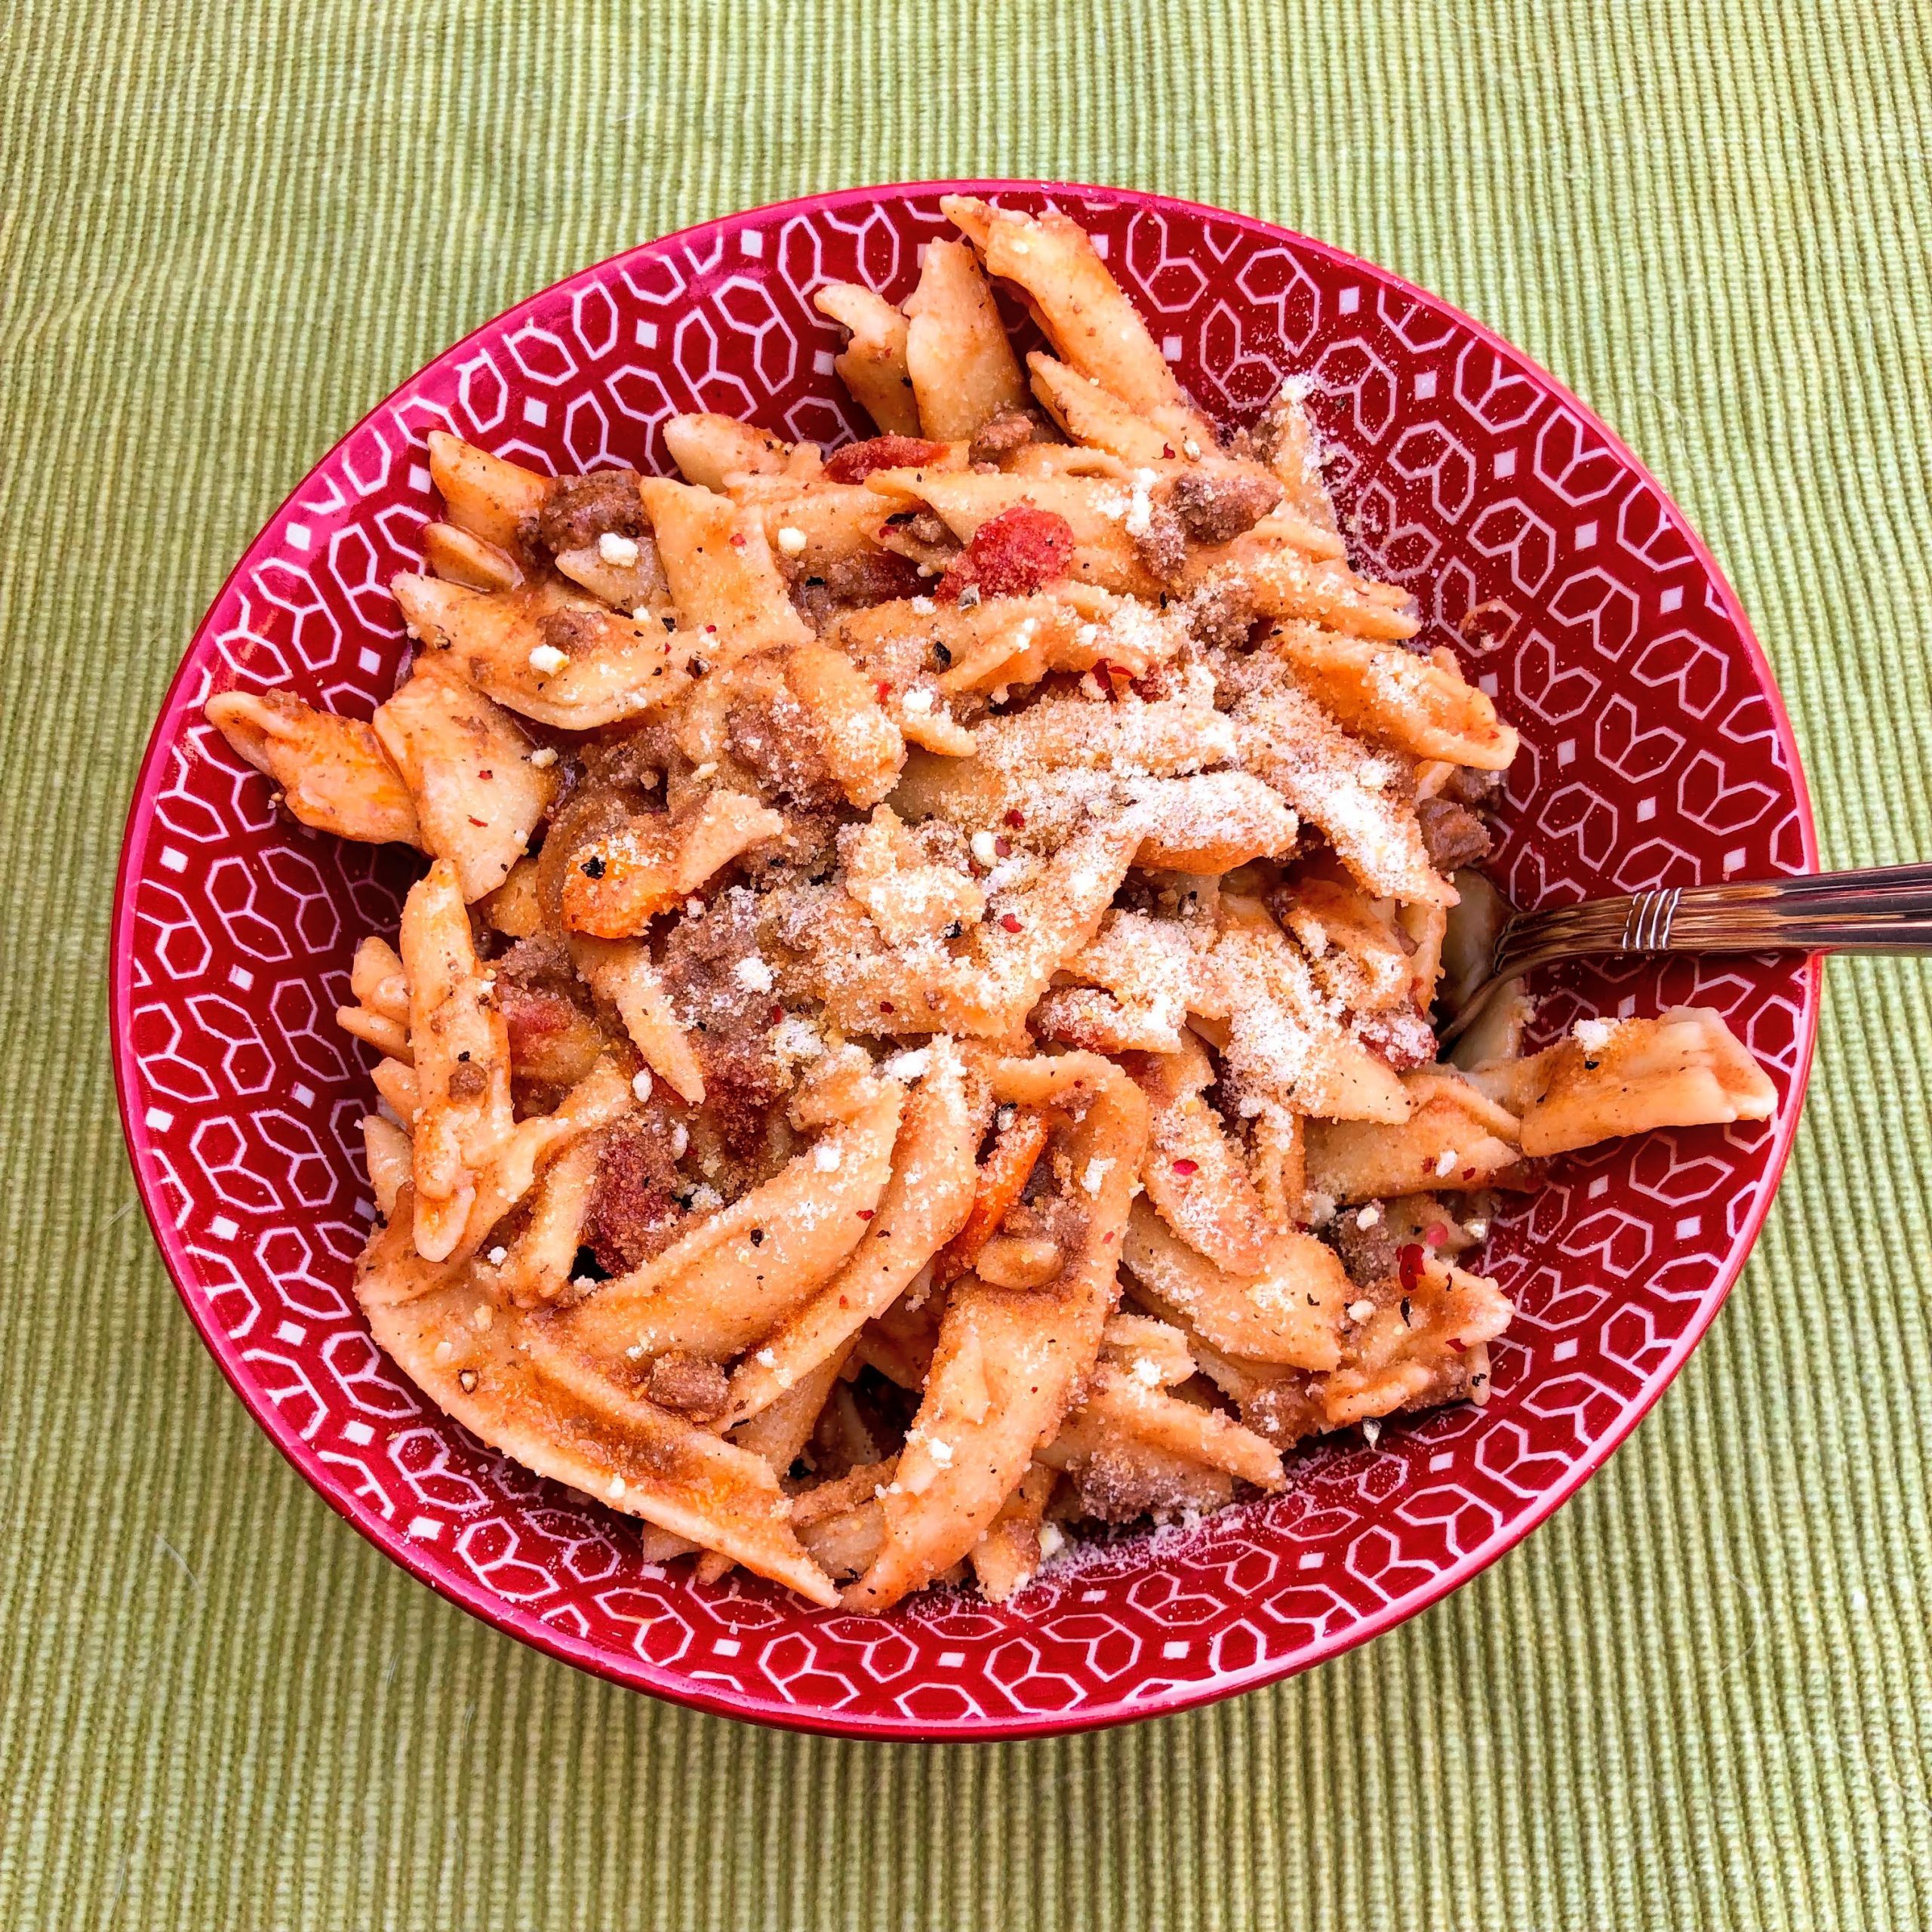 Leftover The ONE Beef and Veggies Sauce with Penne Pasta in a red bowl on a green placemat